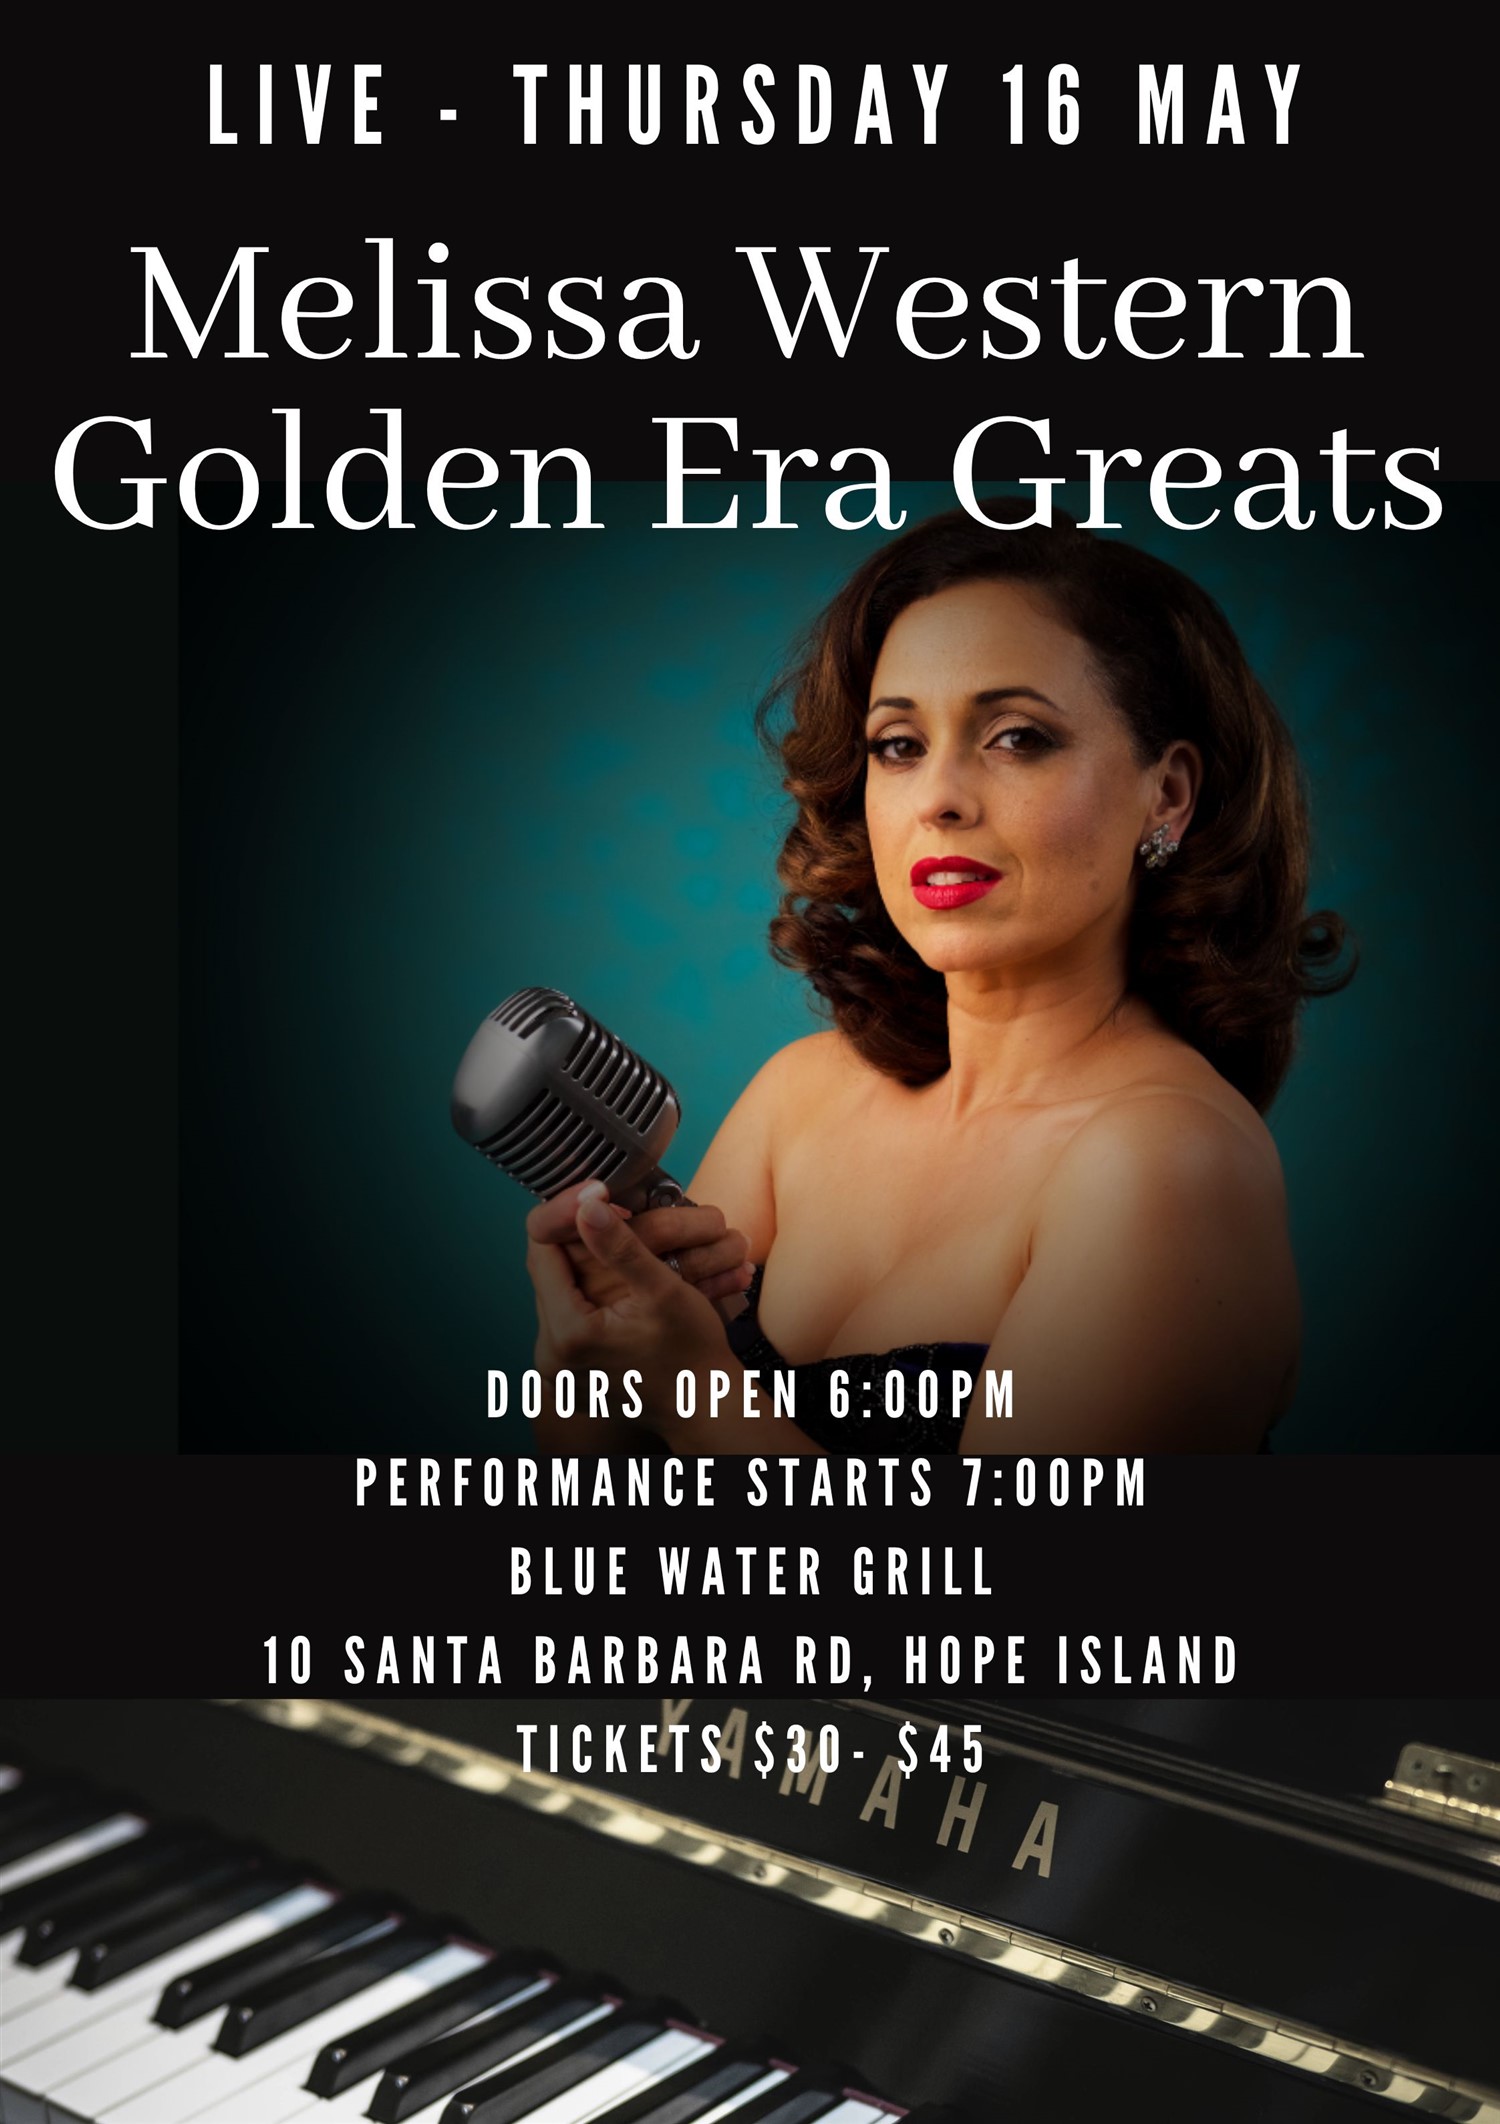 Melissa Western - Golden Era Greats  on May 16, 18:00@Hope Island Jazz - Blue Water Grill - Buy tickets and Get information on Hope Island Jazz hopeislandjazz.com.au